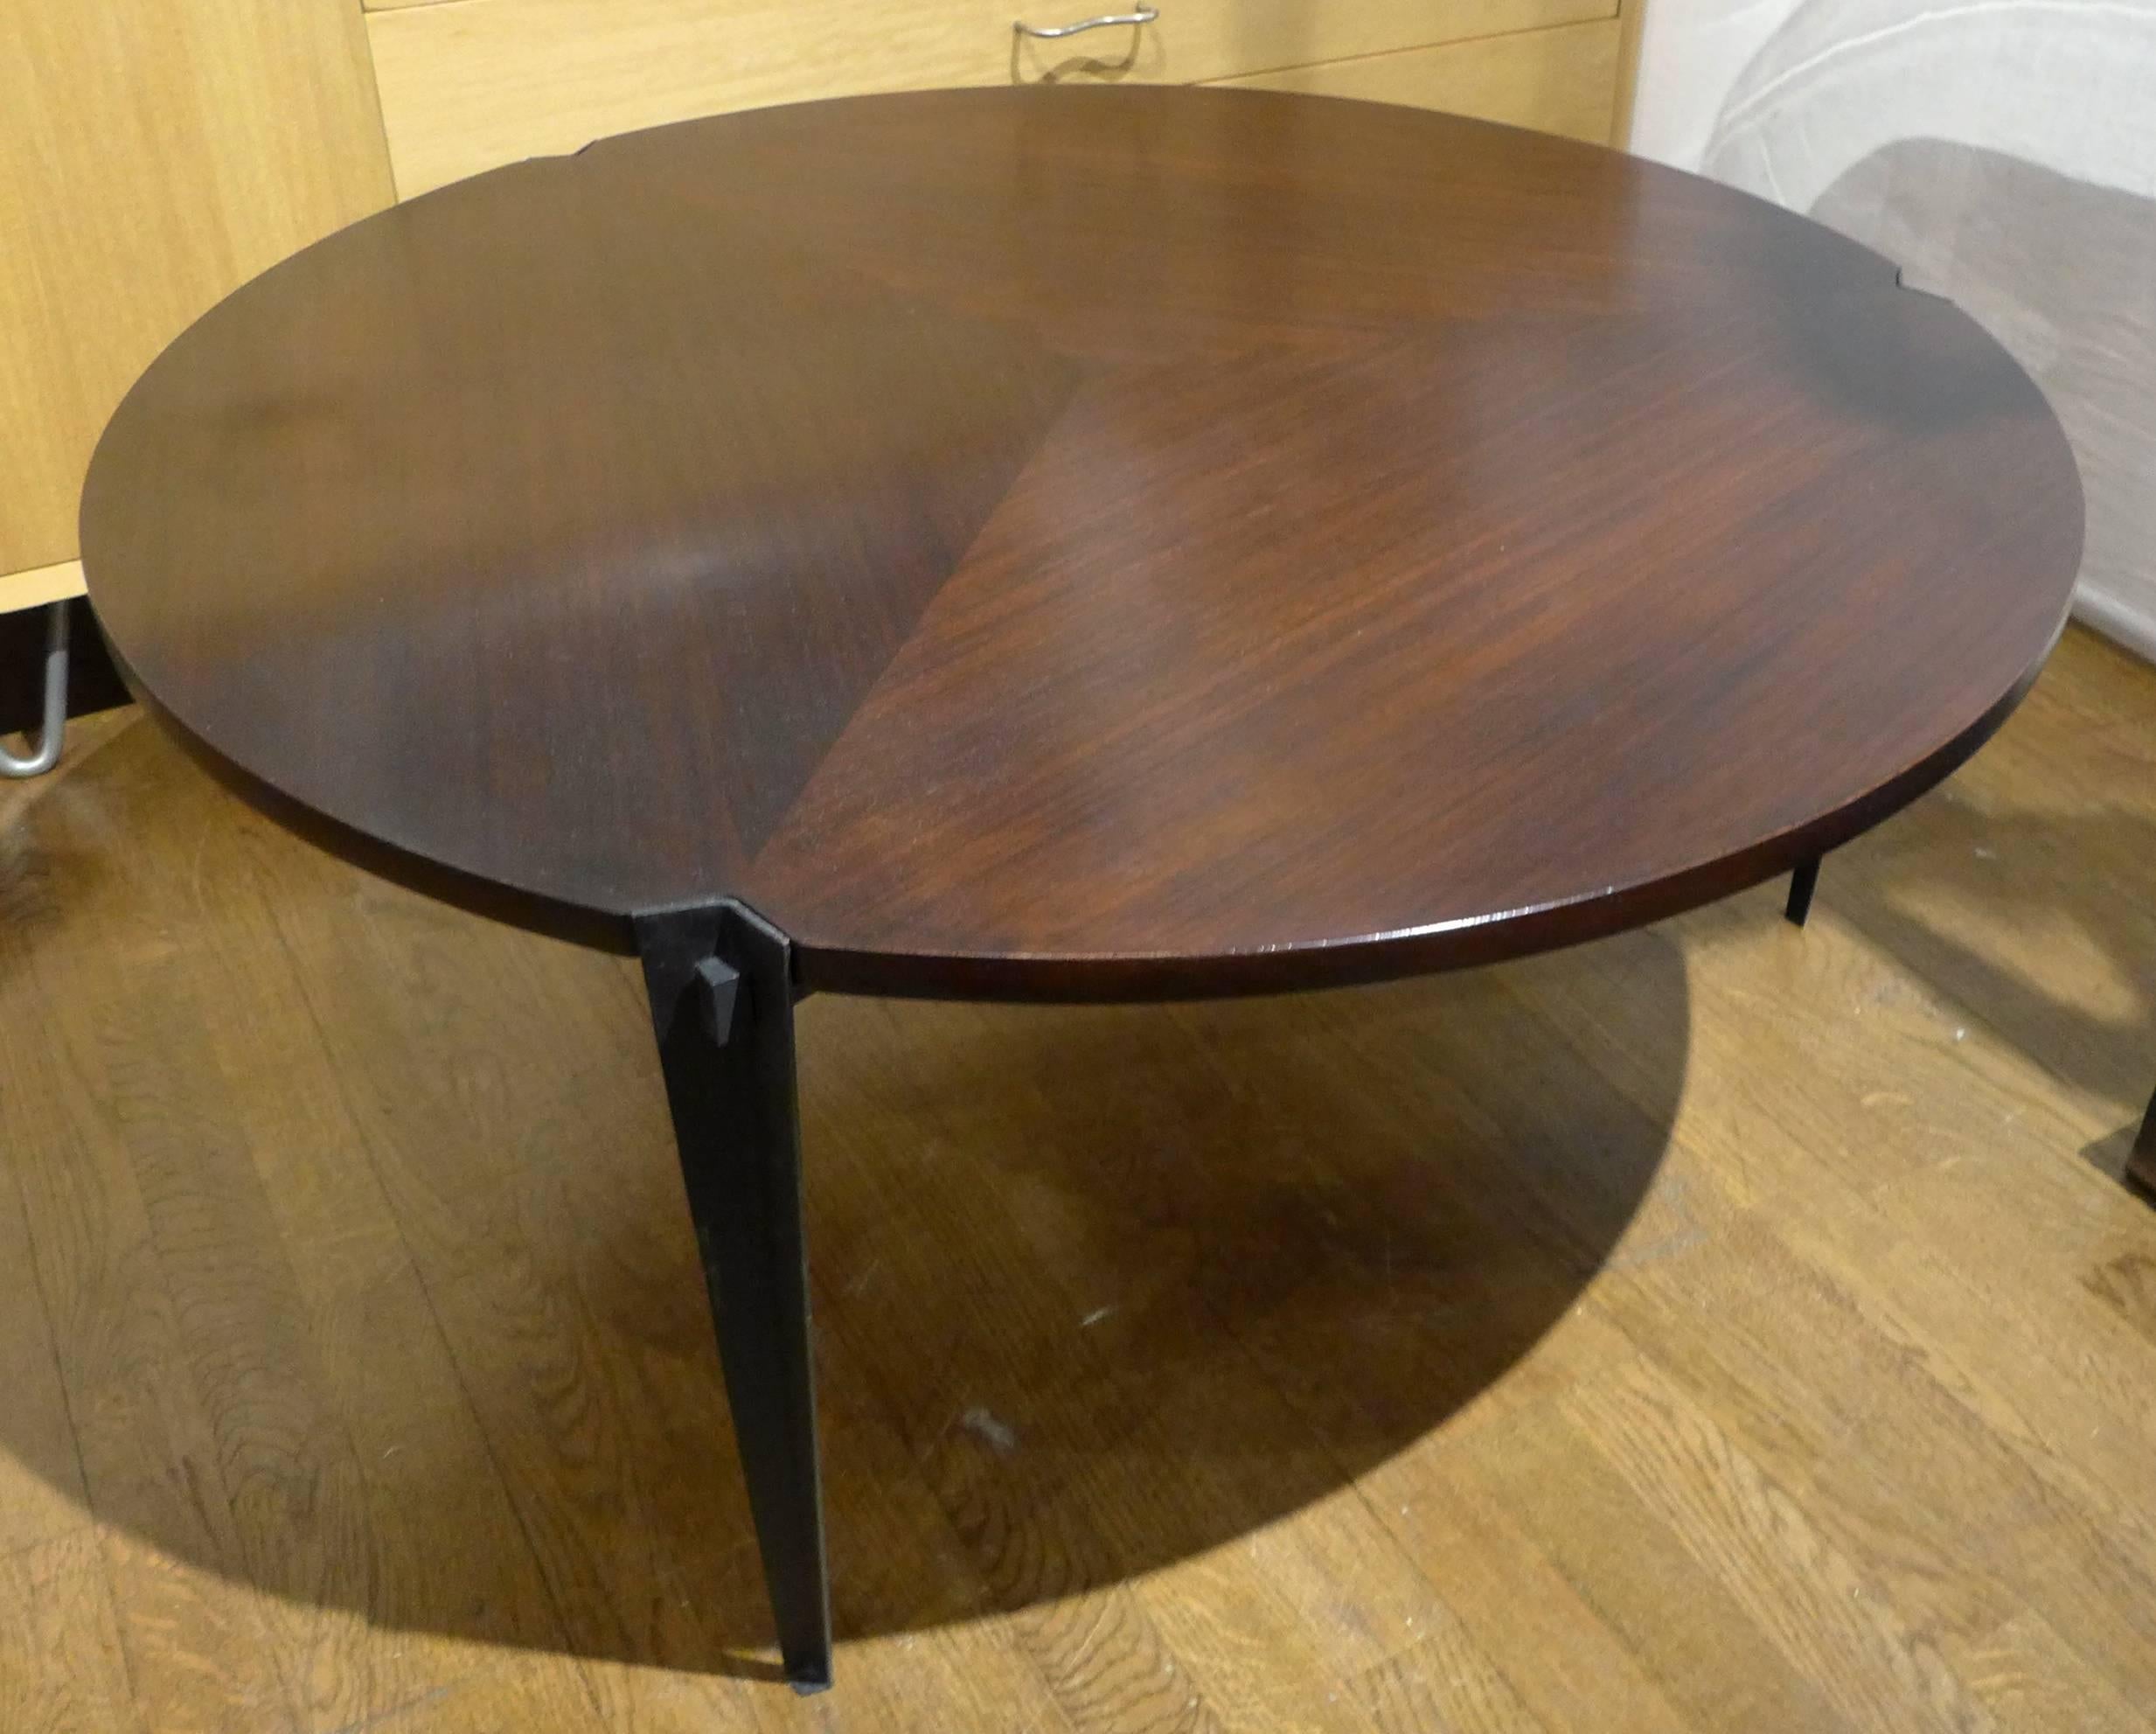 Round cocktail table with tripod enameled steel base. Top is reversible; rosewood on one side, mahogany on the other-both sides with pie-shaped patterning. Designed by Osvaldo Borsani for Tecno, circa 1960. Elegant details throughout. Top has been